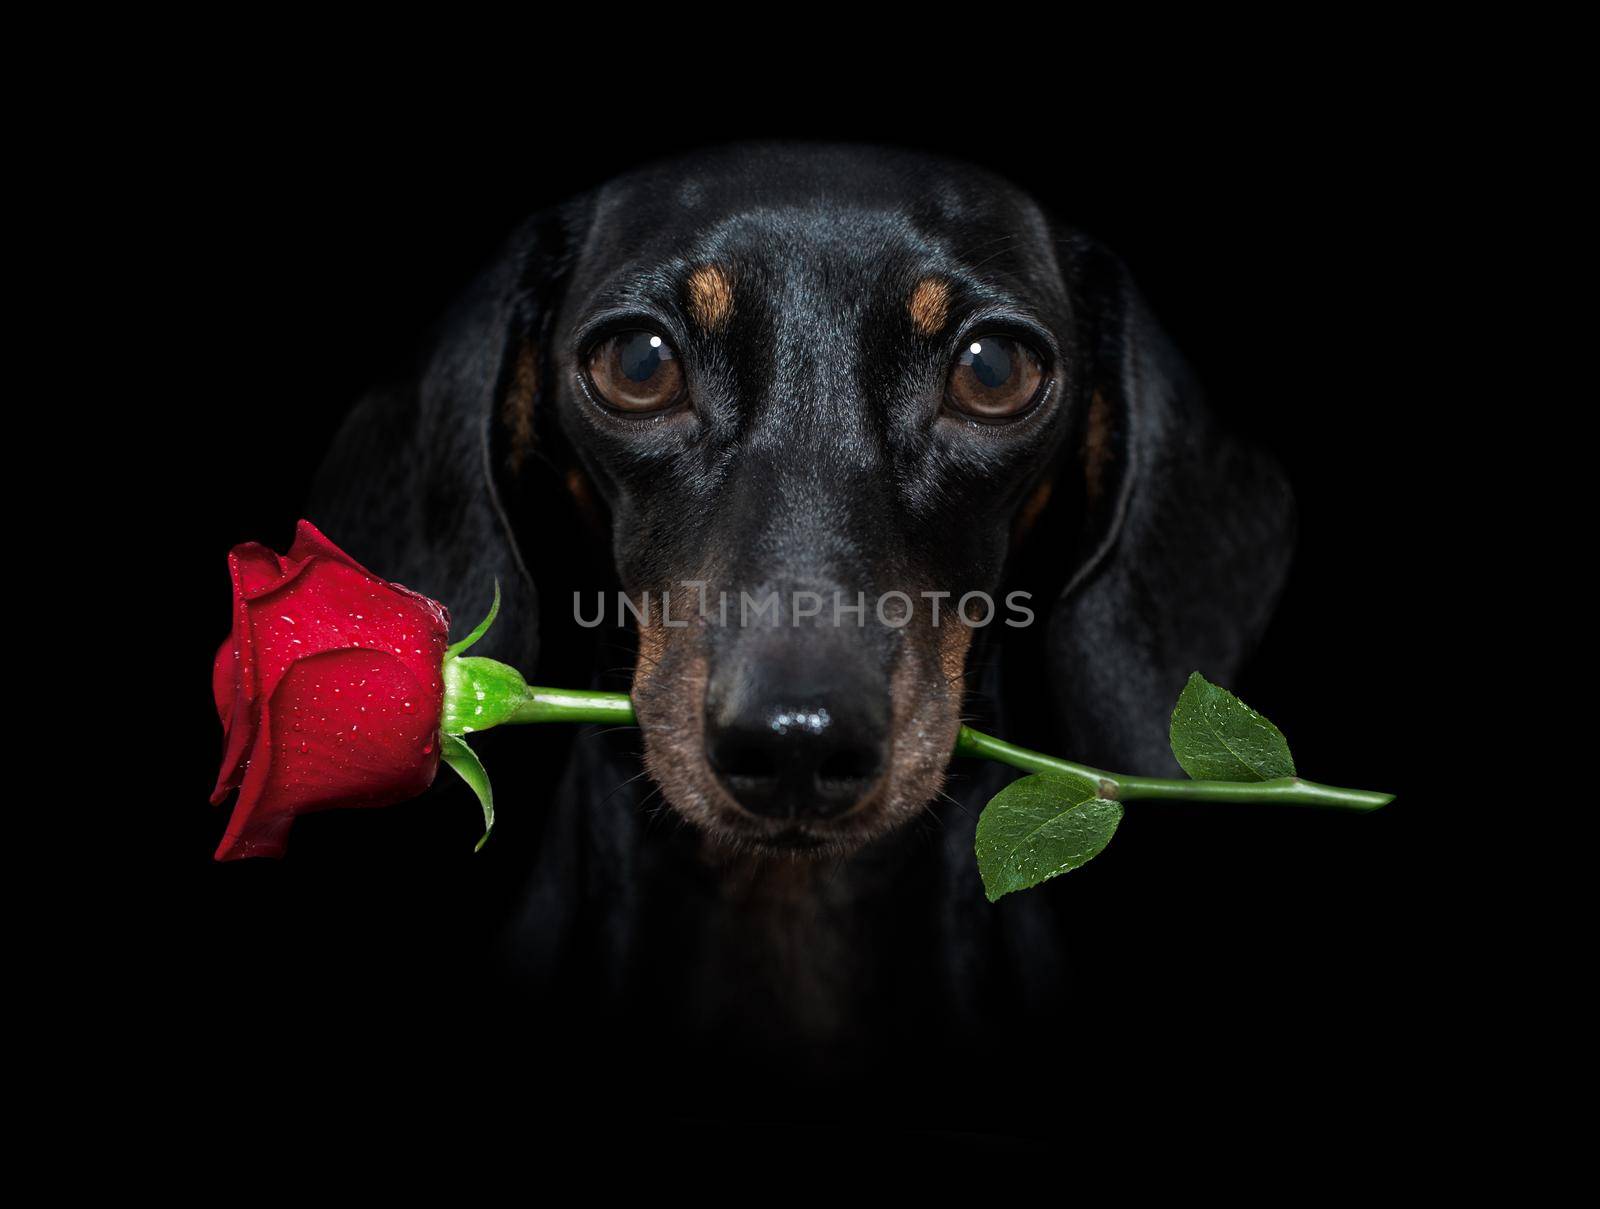 sausage dachshund  dog isolated on black  dramatic dark background on valentines  , with rose in mouth